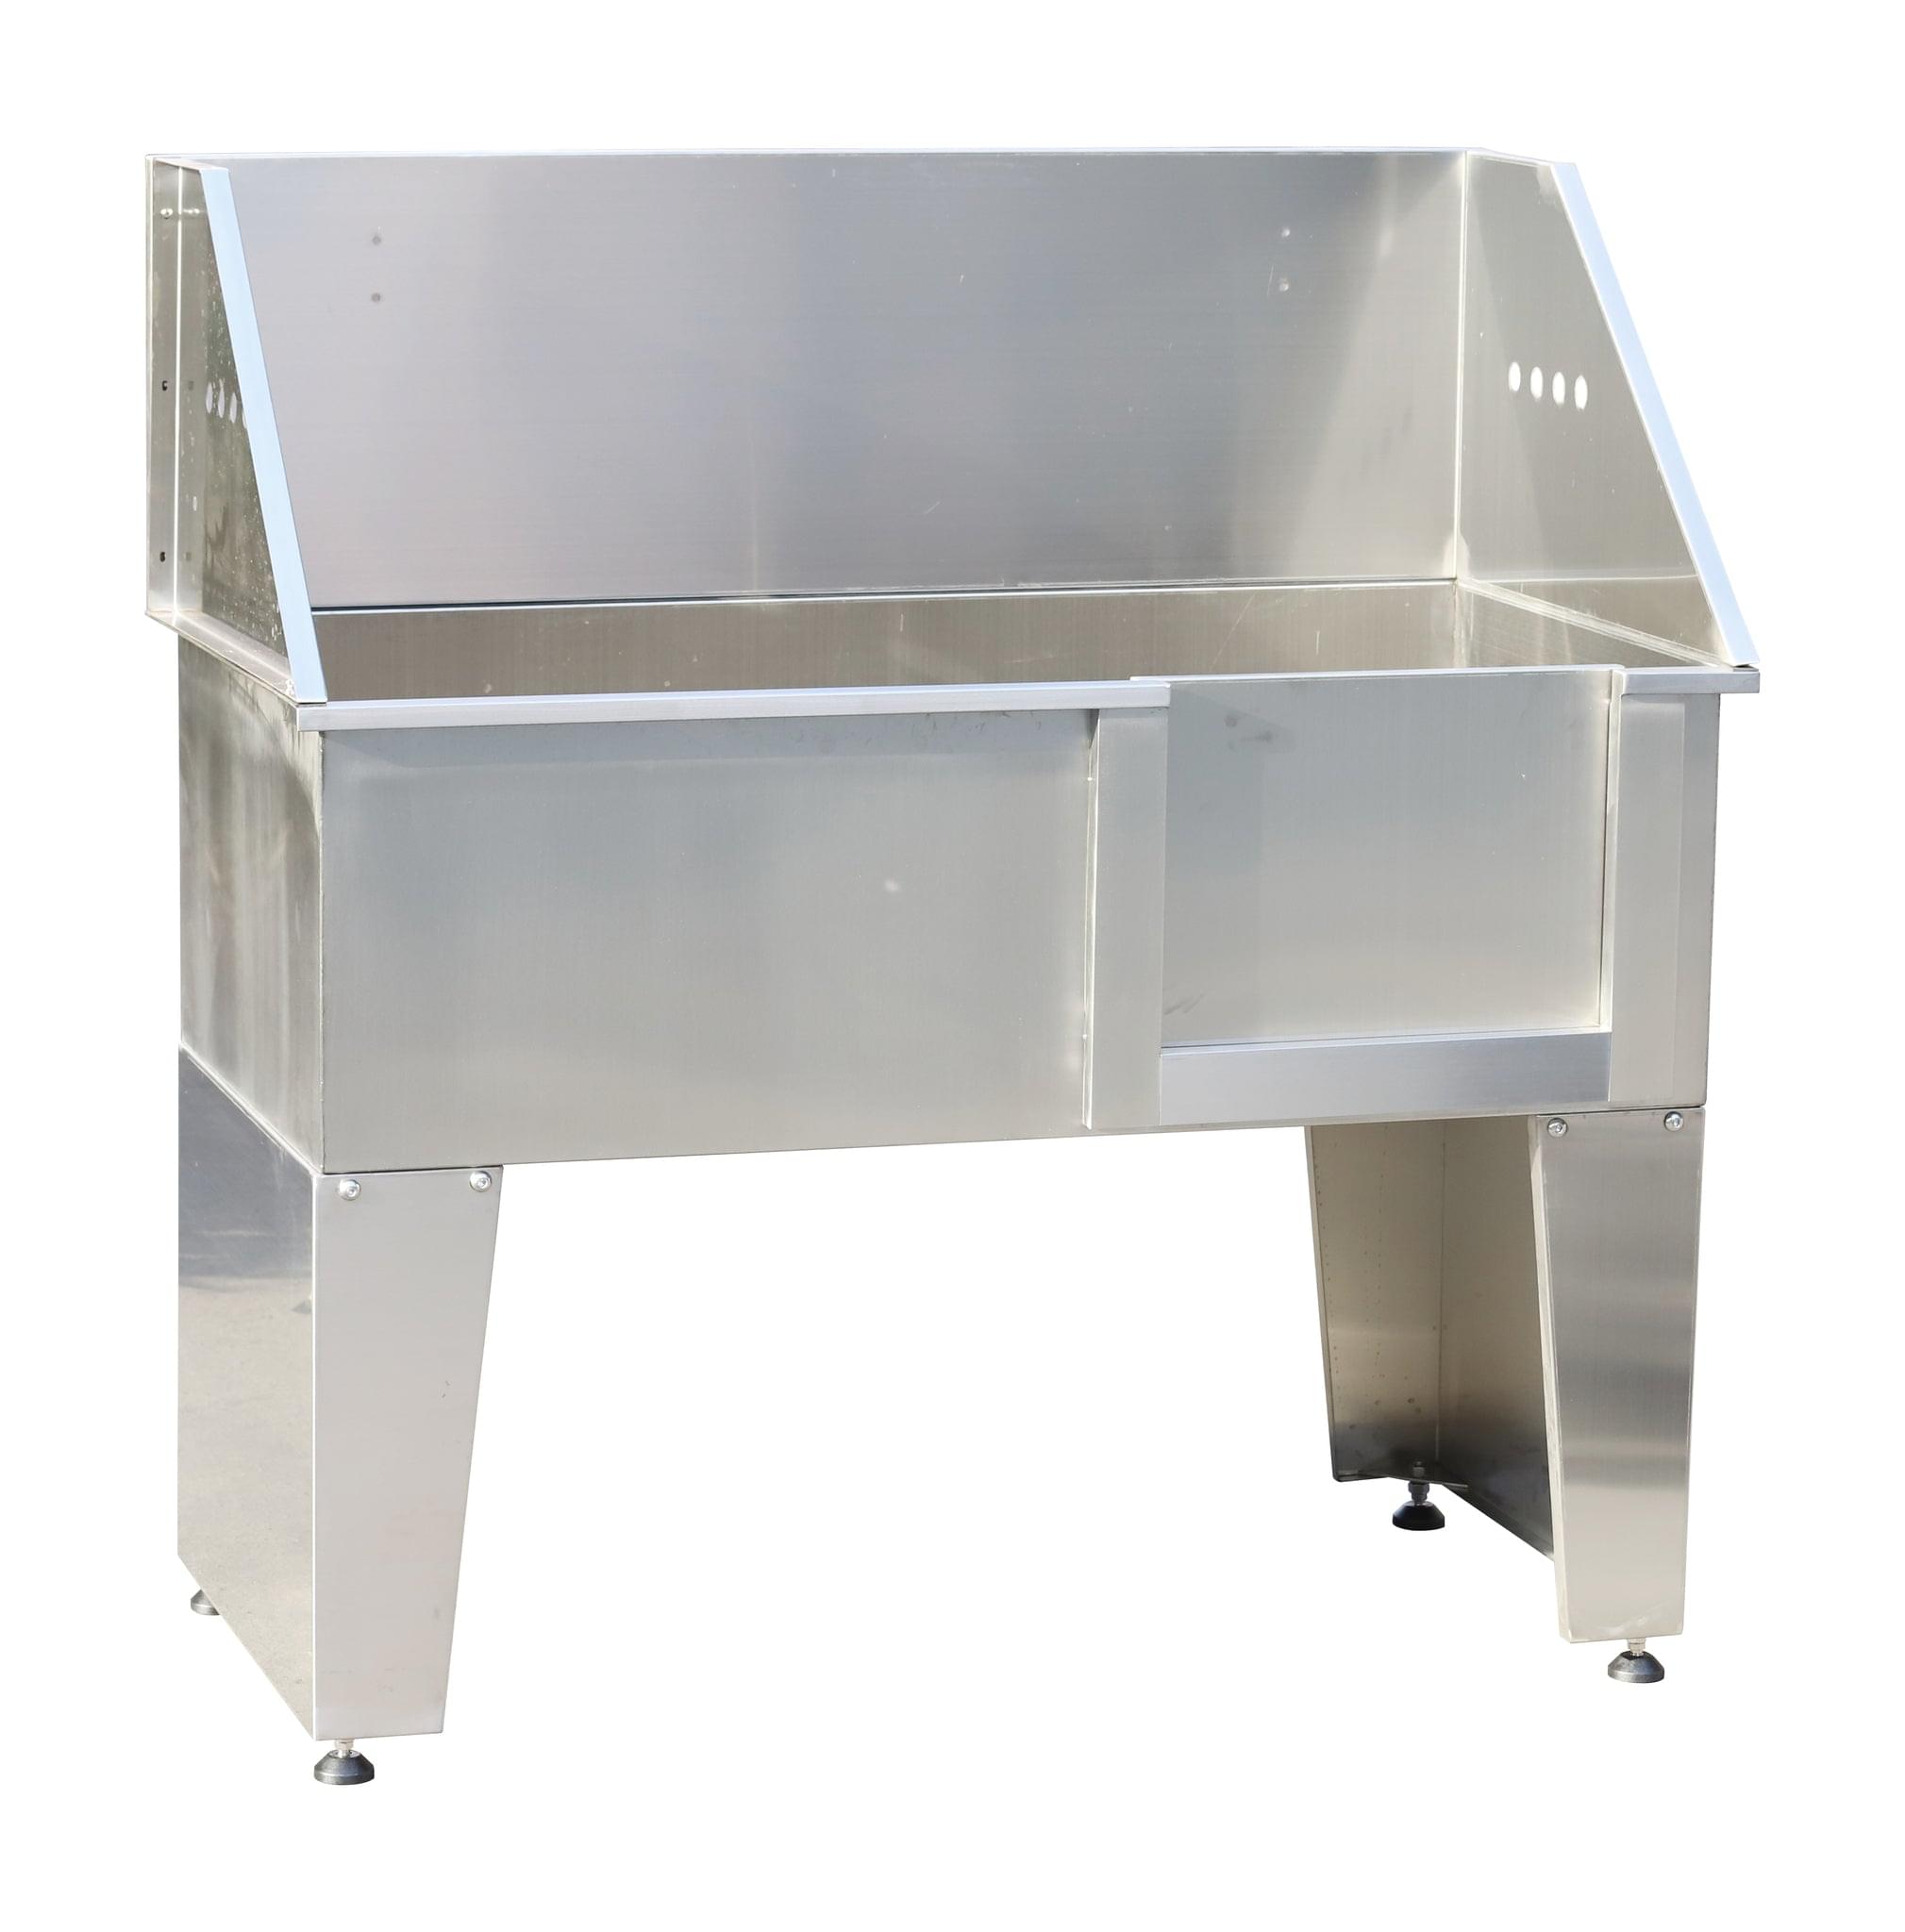 AEOLUS Economical Fully Welded Stainless Steel Pet Bathtub With Lifting Door